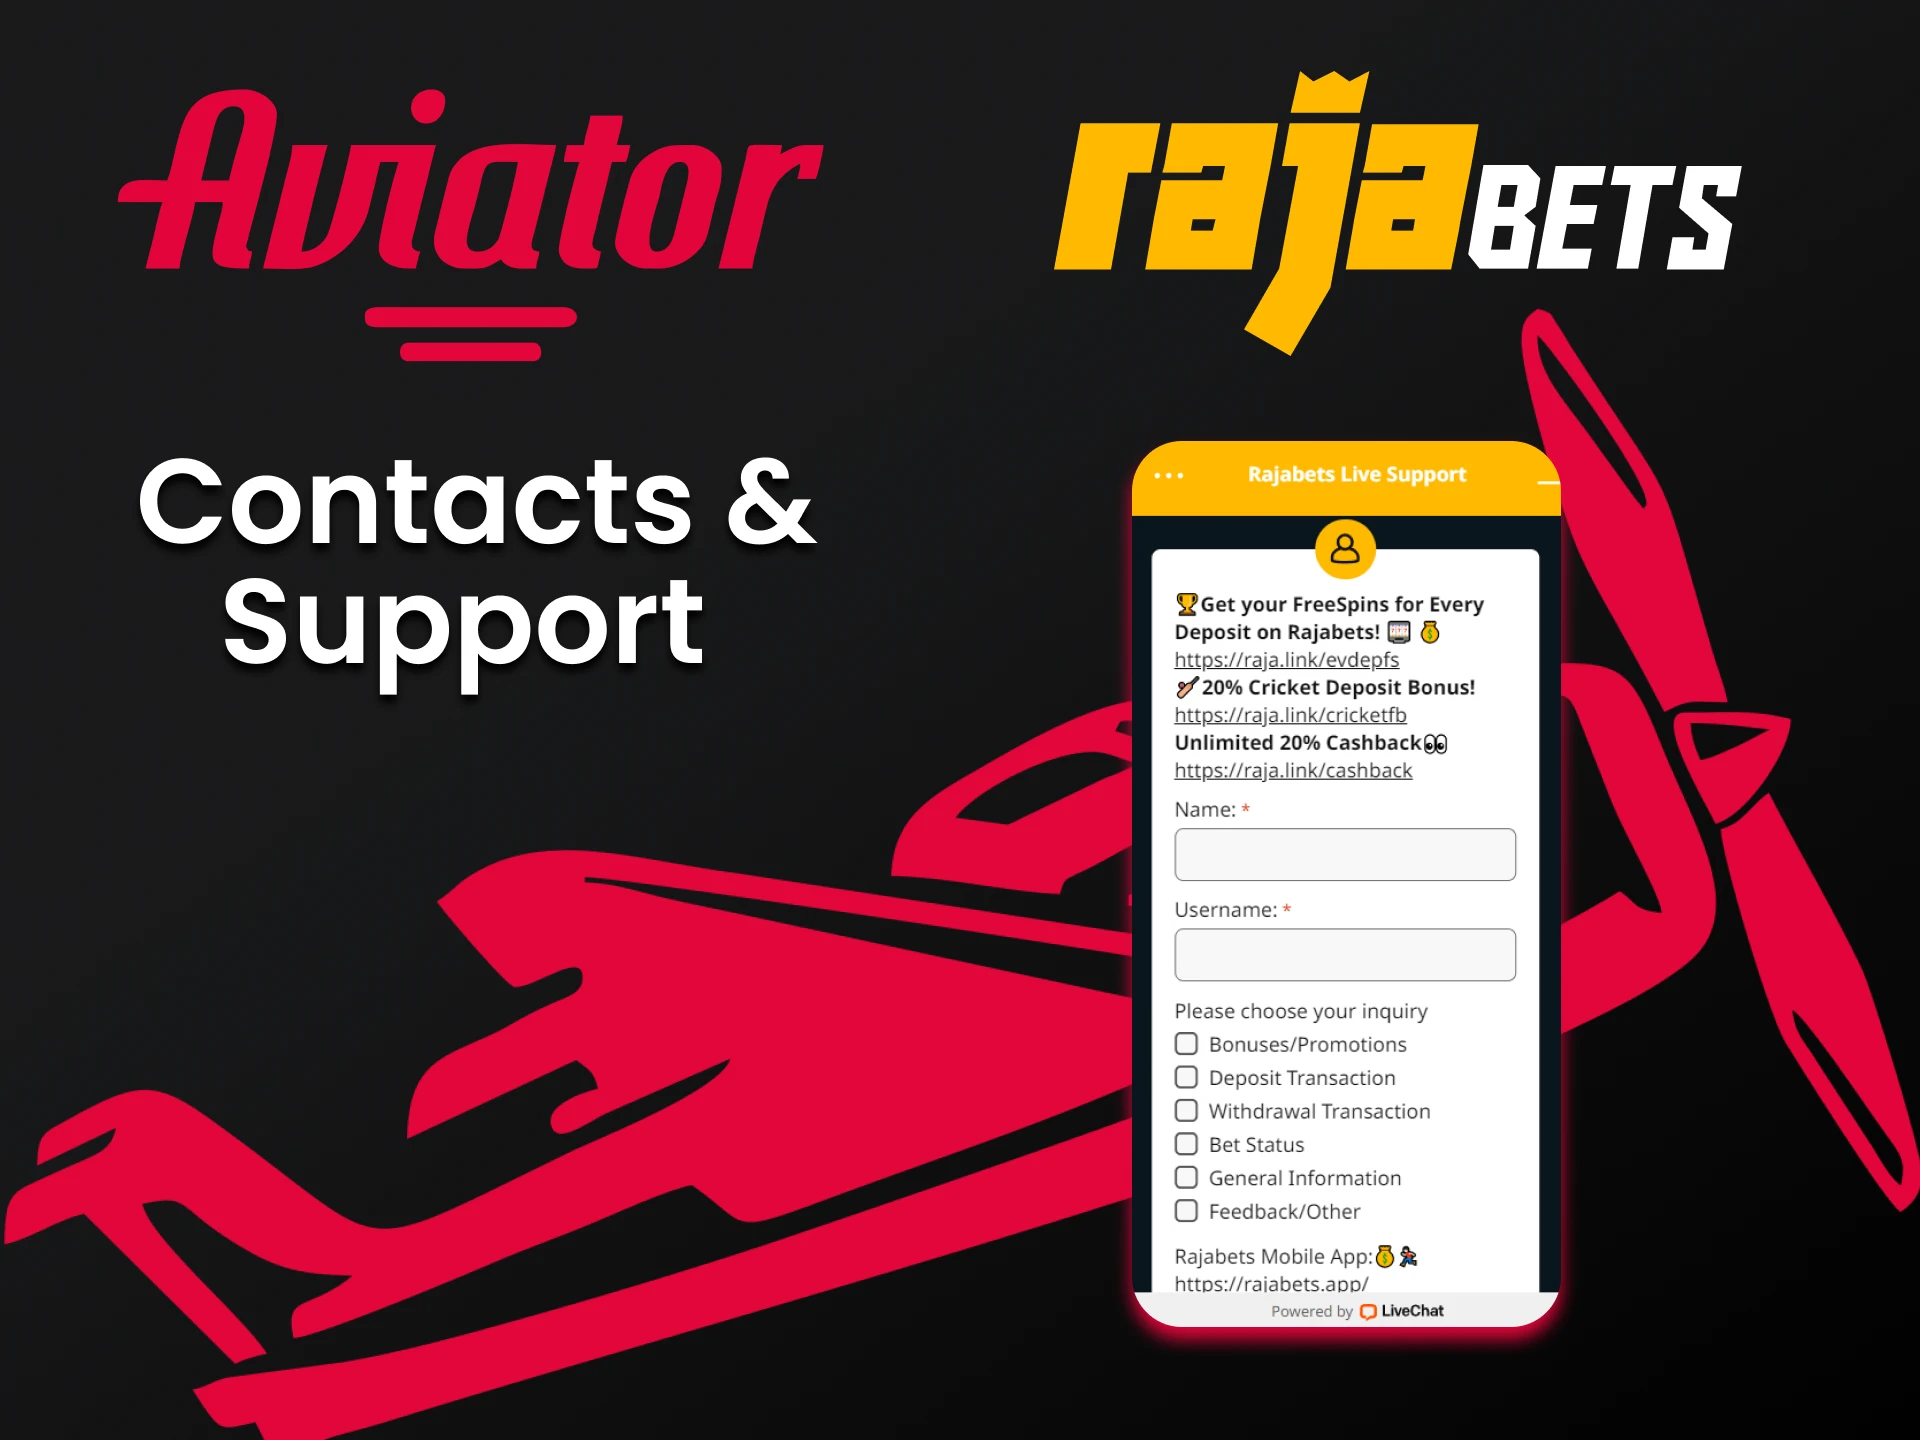 The Rajabets team will answer all your questions.